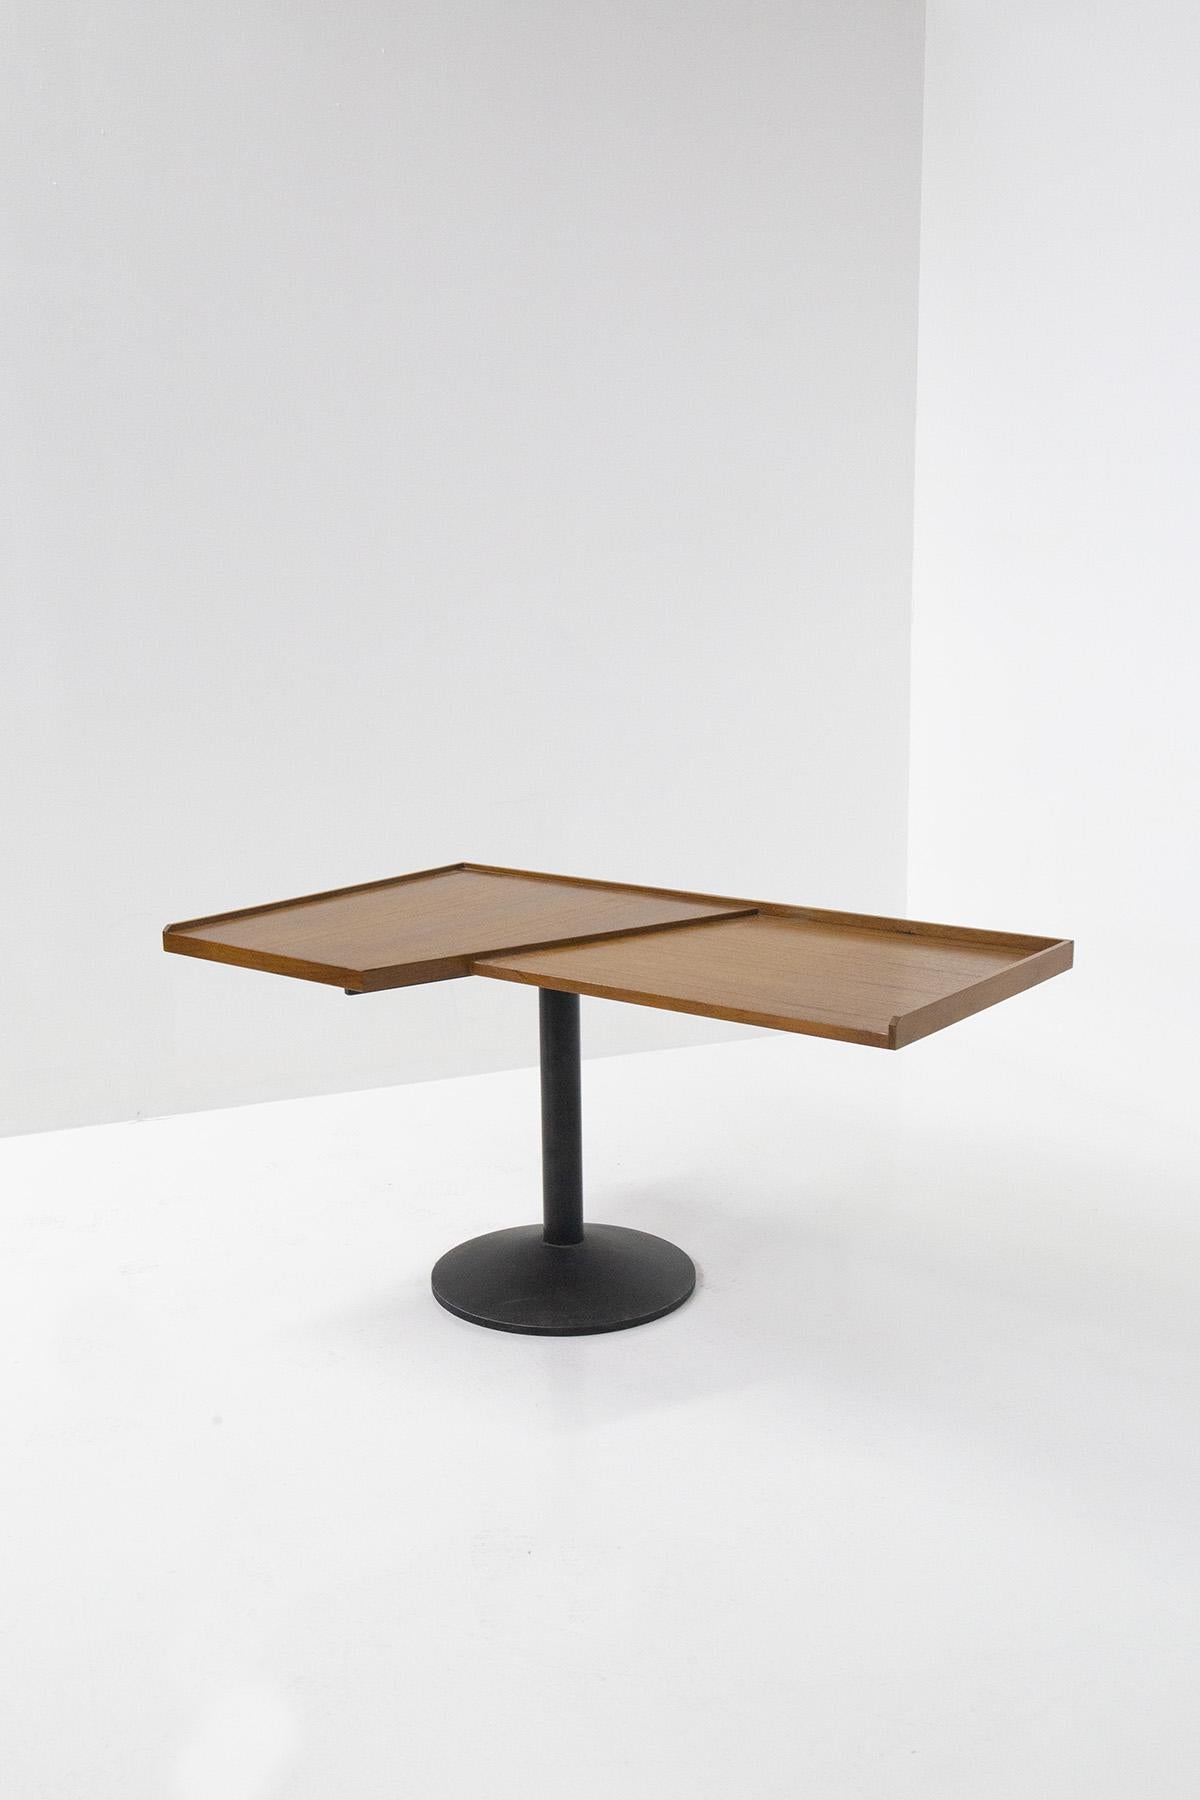 Rare and important desk model Stadera designed by Franco Albini for the Poggi manufacture, in 1959. Model 840. Made of noble wood for its shelf, the desk is the perfect modernist element of great Italian design. Its countertop features clean, sharp